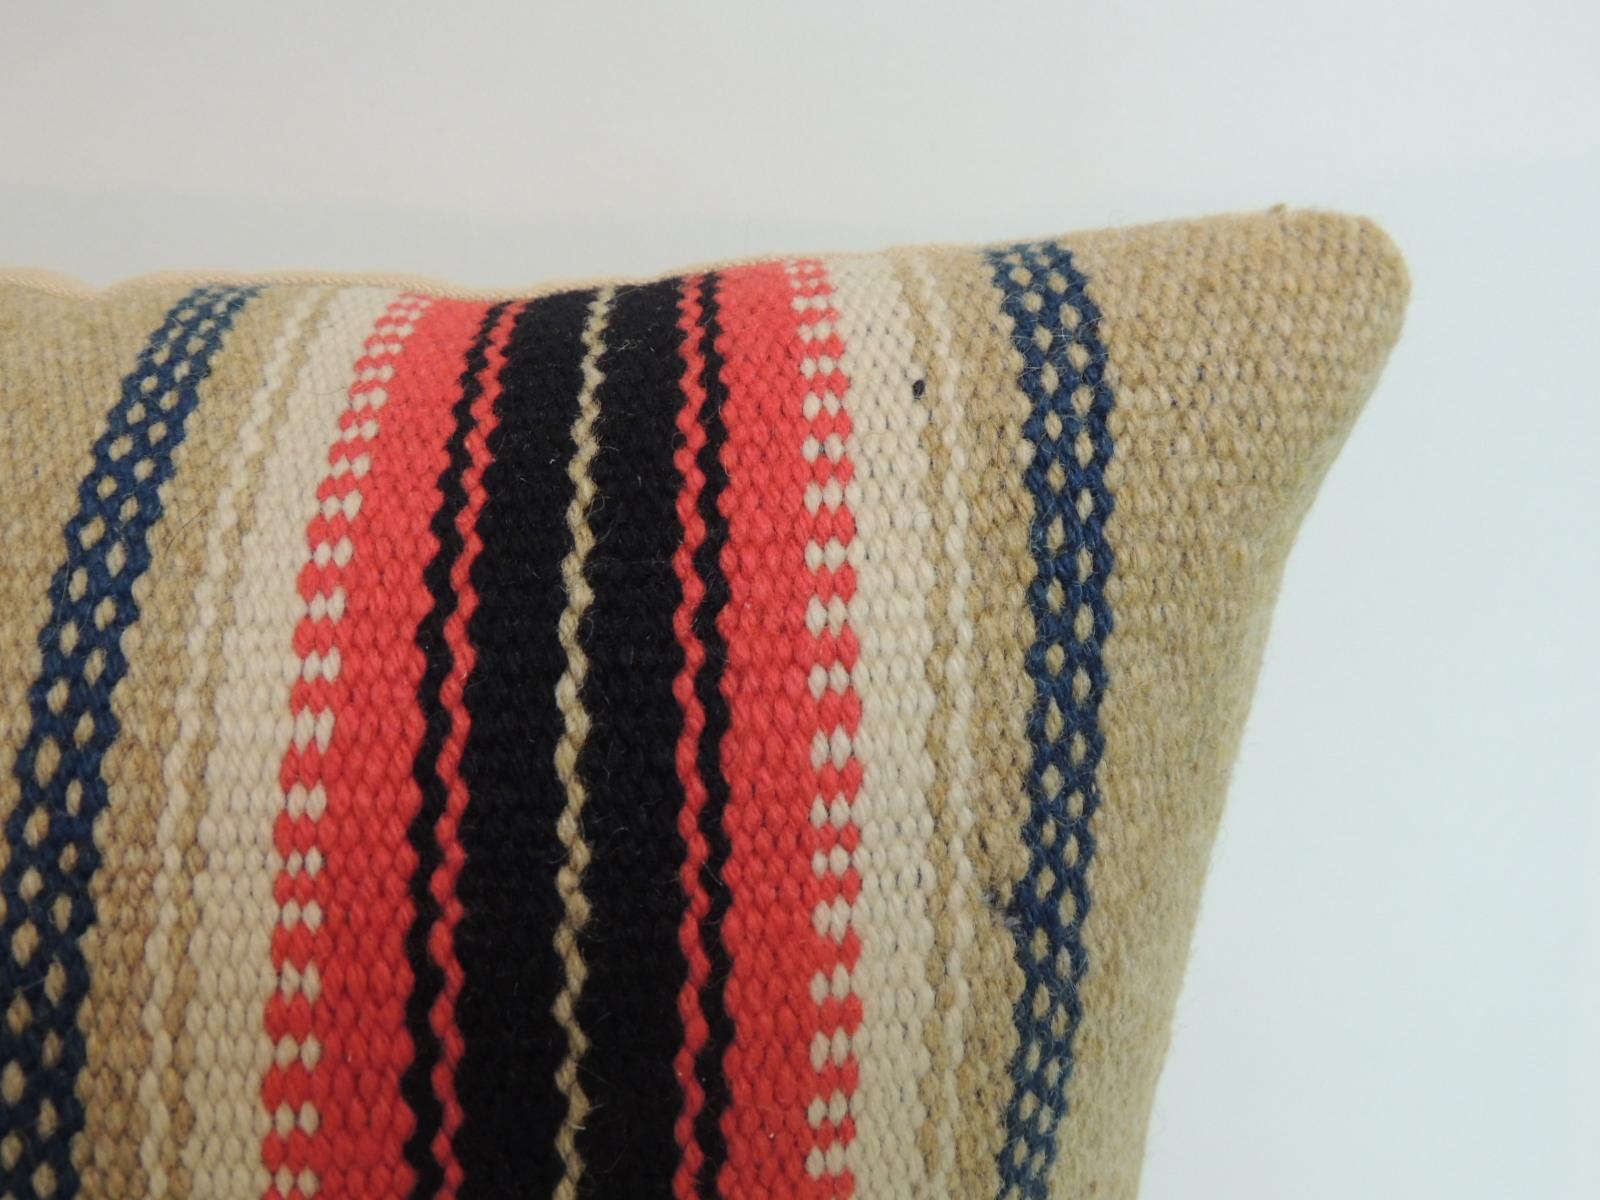 Vintage square Southwestern style woven wool decorative pillow.
Vintage Southwestern woven wool decorative square pillow. Accent pillow in shades of red, black, mustard yellow, hunter green and tan. Santa Fe style throw pillow finished in soft